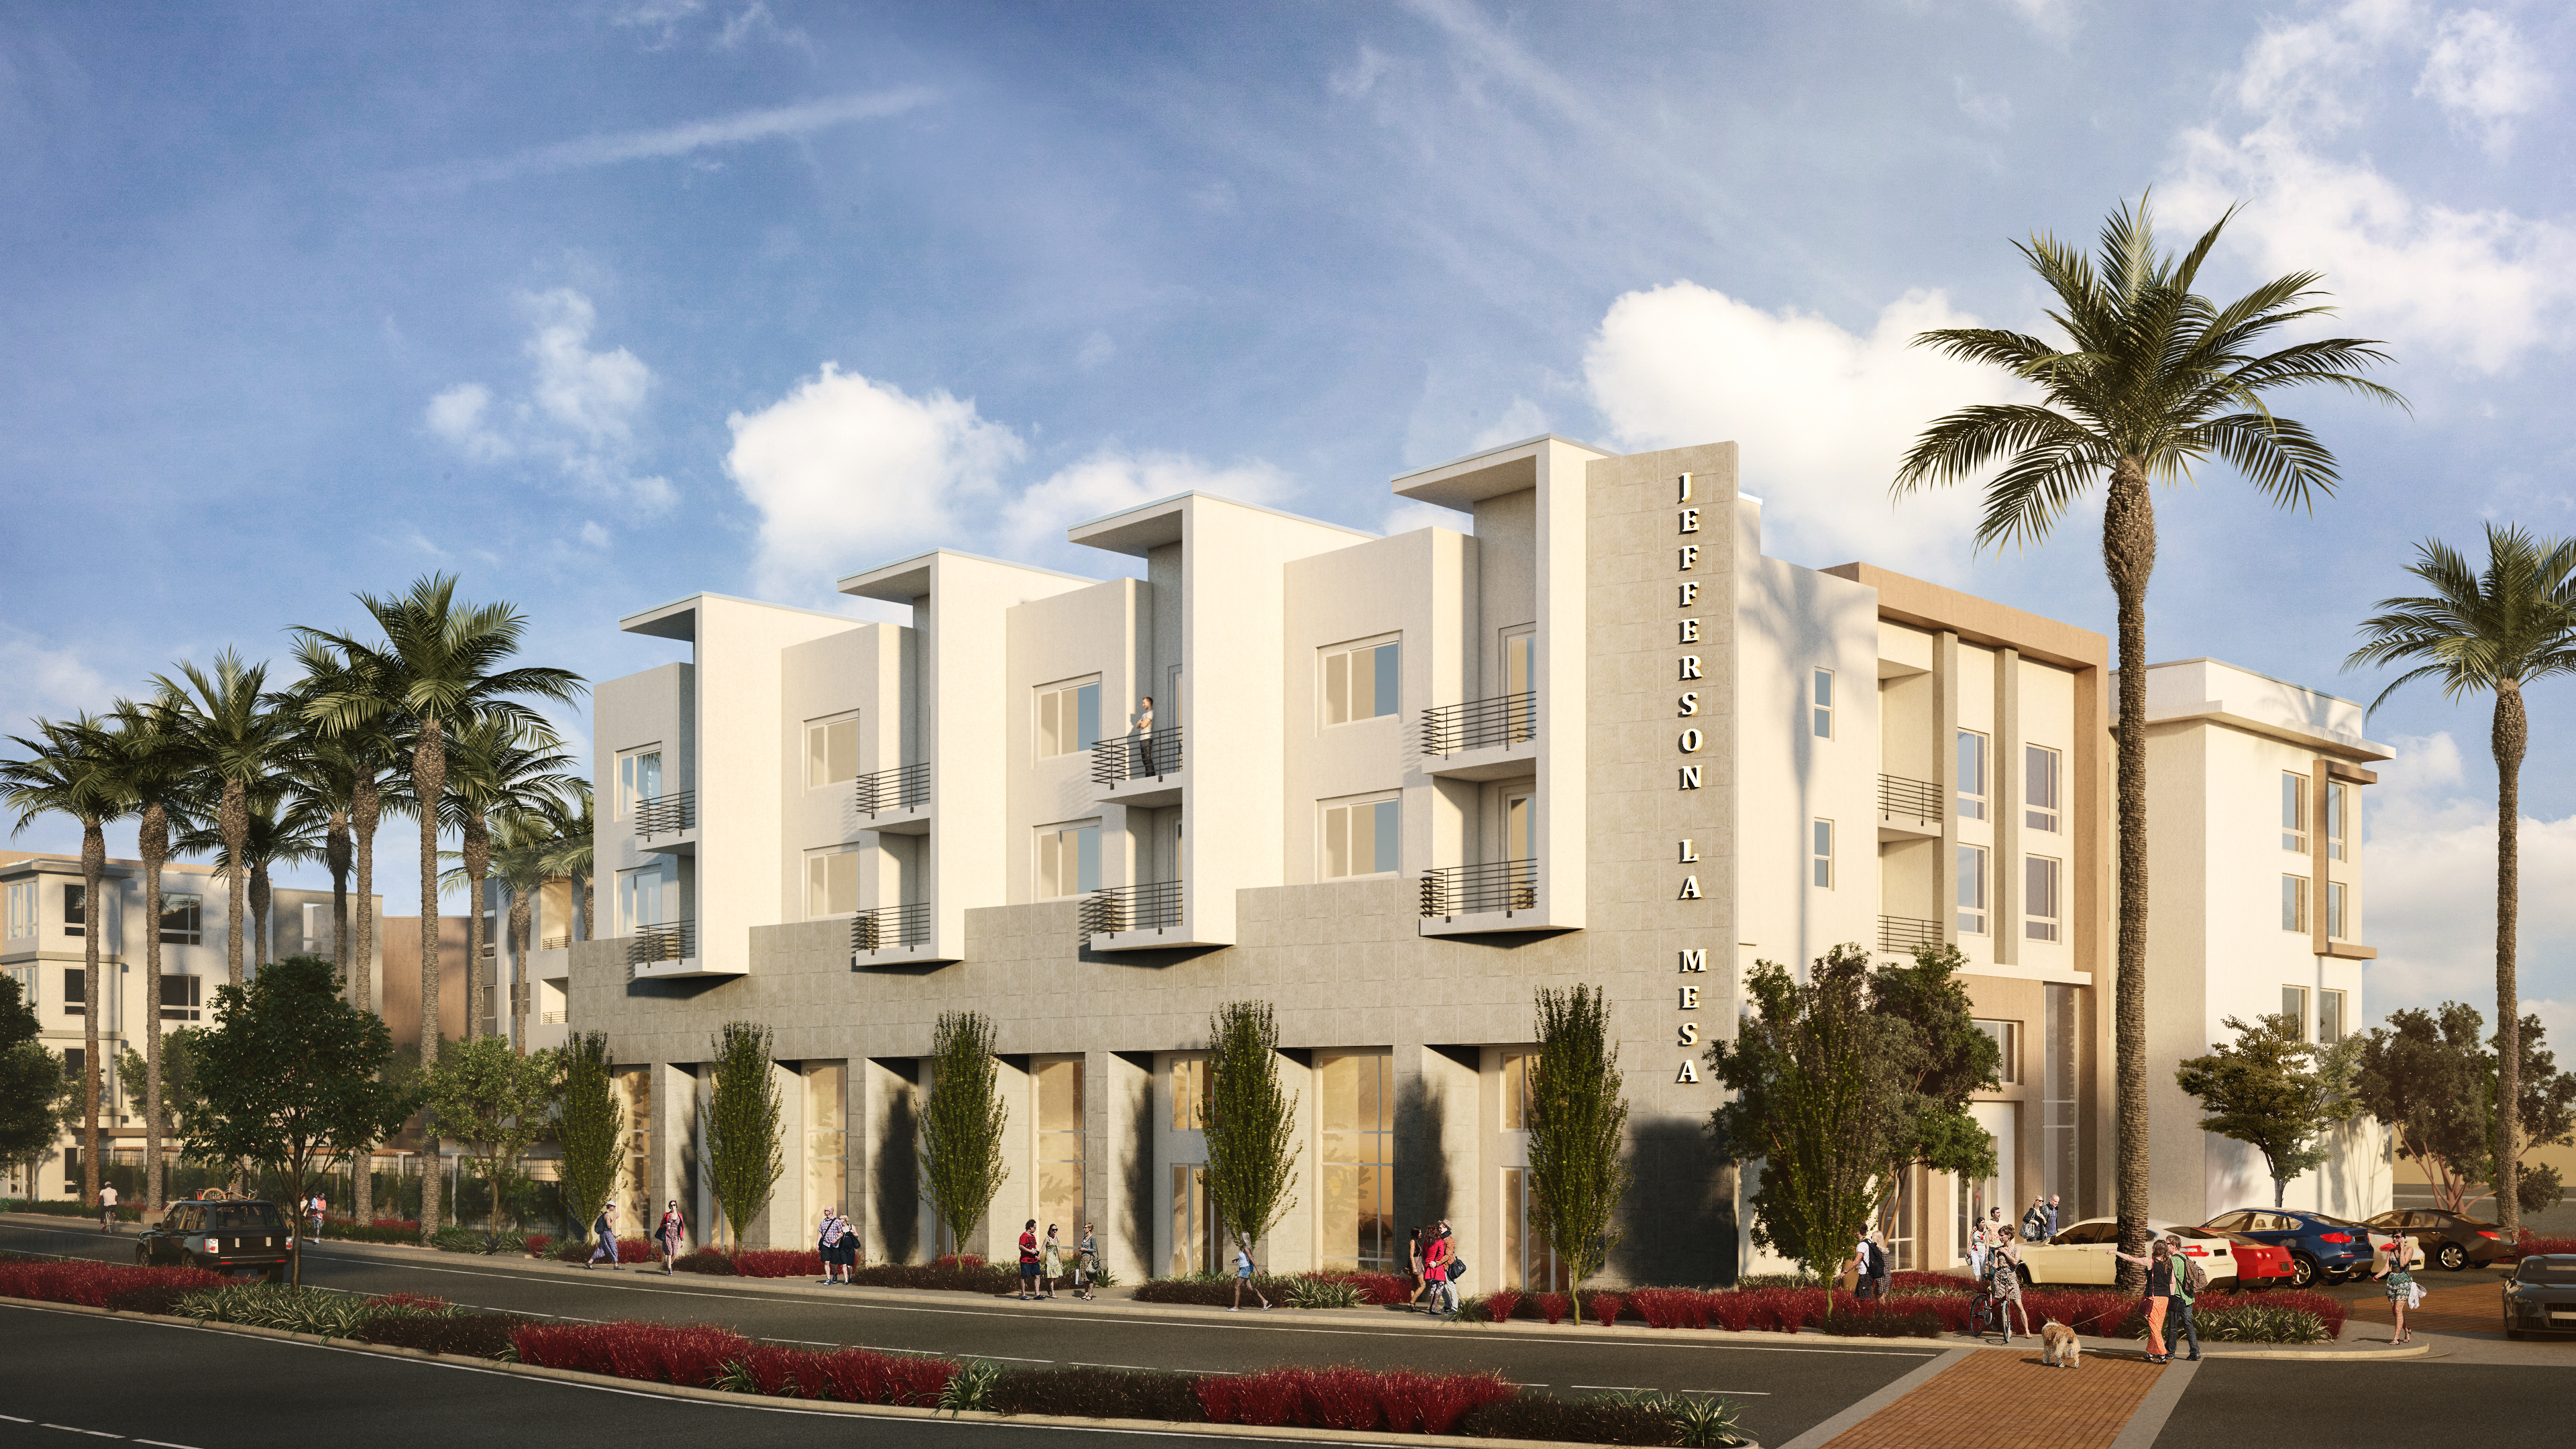 Rendering of Jefferson La Mesa, a project of JPI of Irving, Texas.